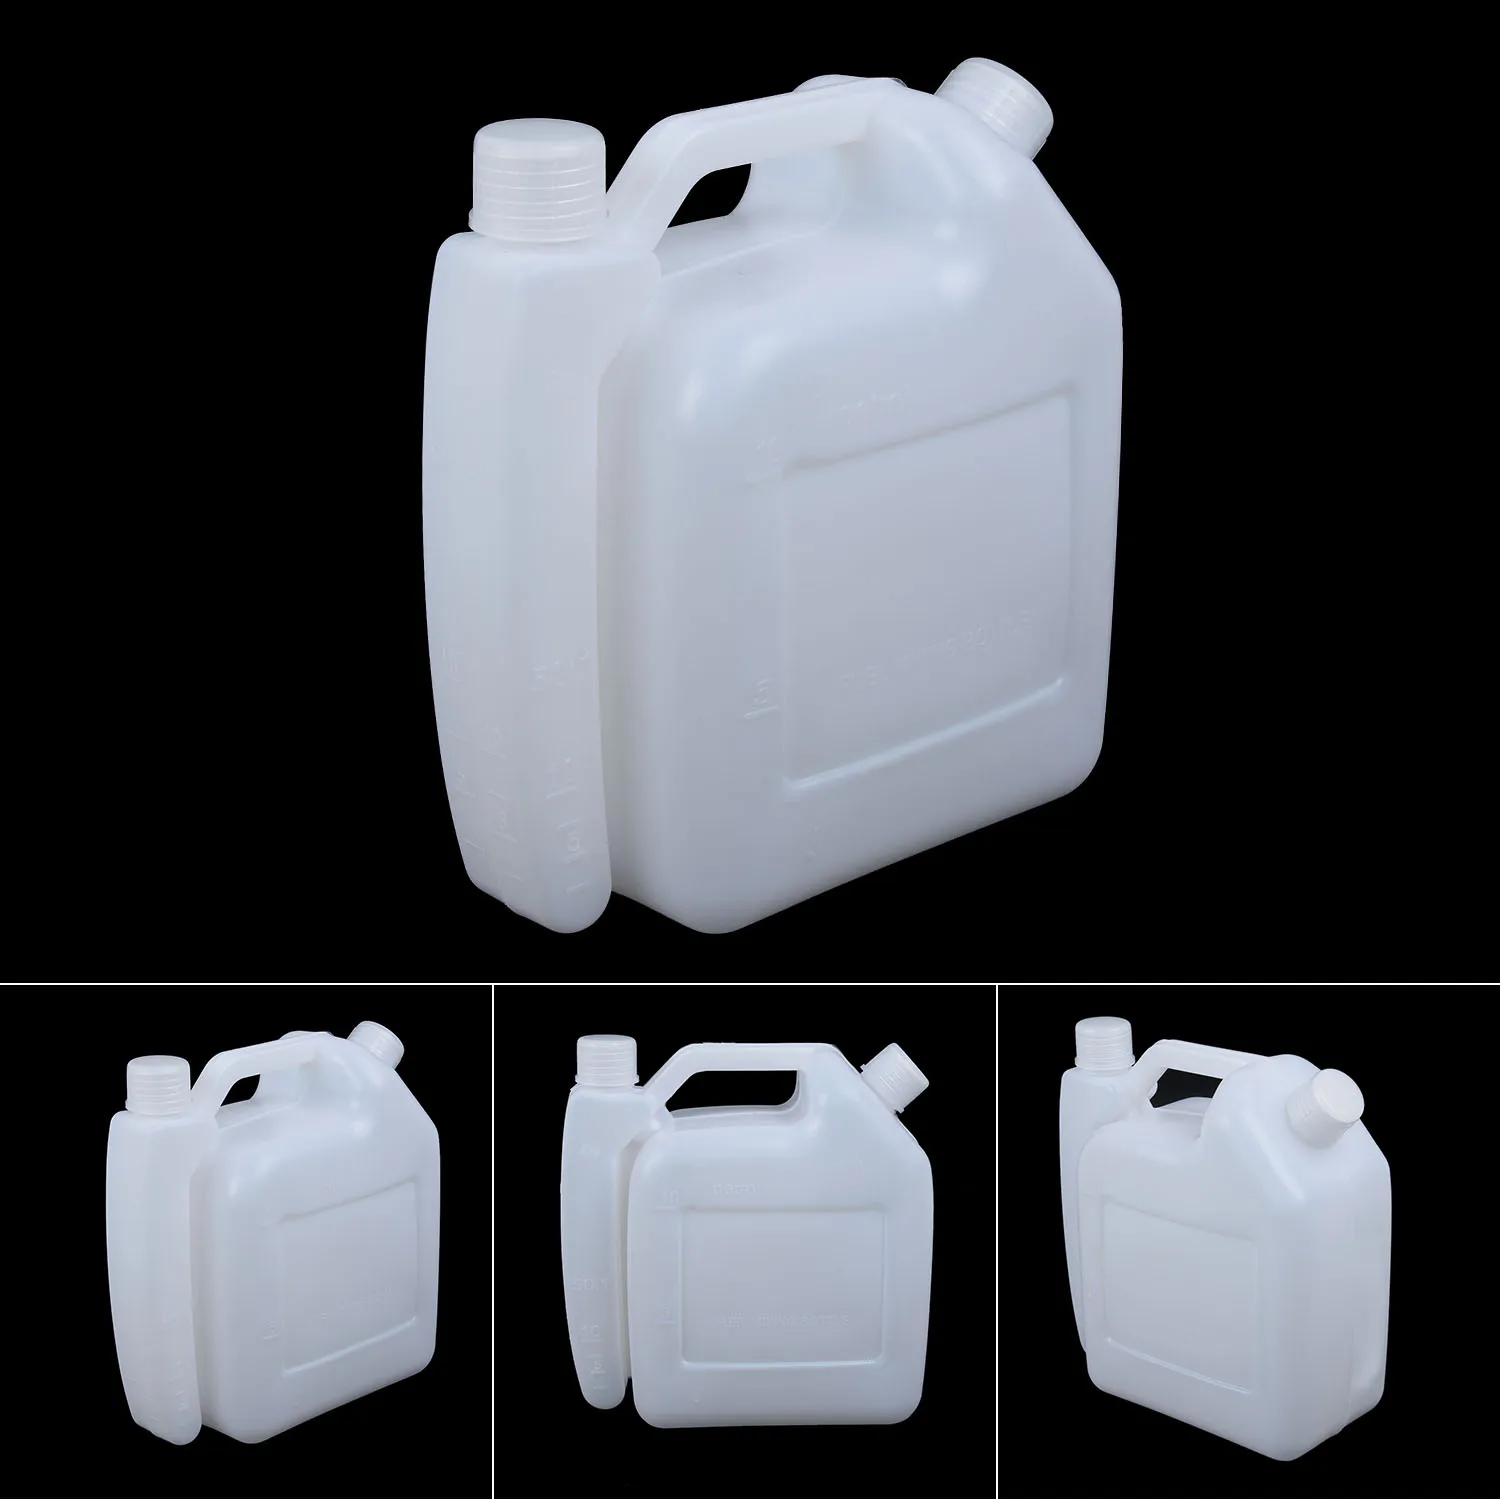 

1 L Oil Pot Petrol Fuel Mixing Bottle Tank 2 Stroke For Chainsaw Trimmers 1:25 50:1 Lawn Mowers Line Strimmers Garden Supplies